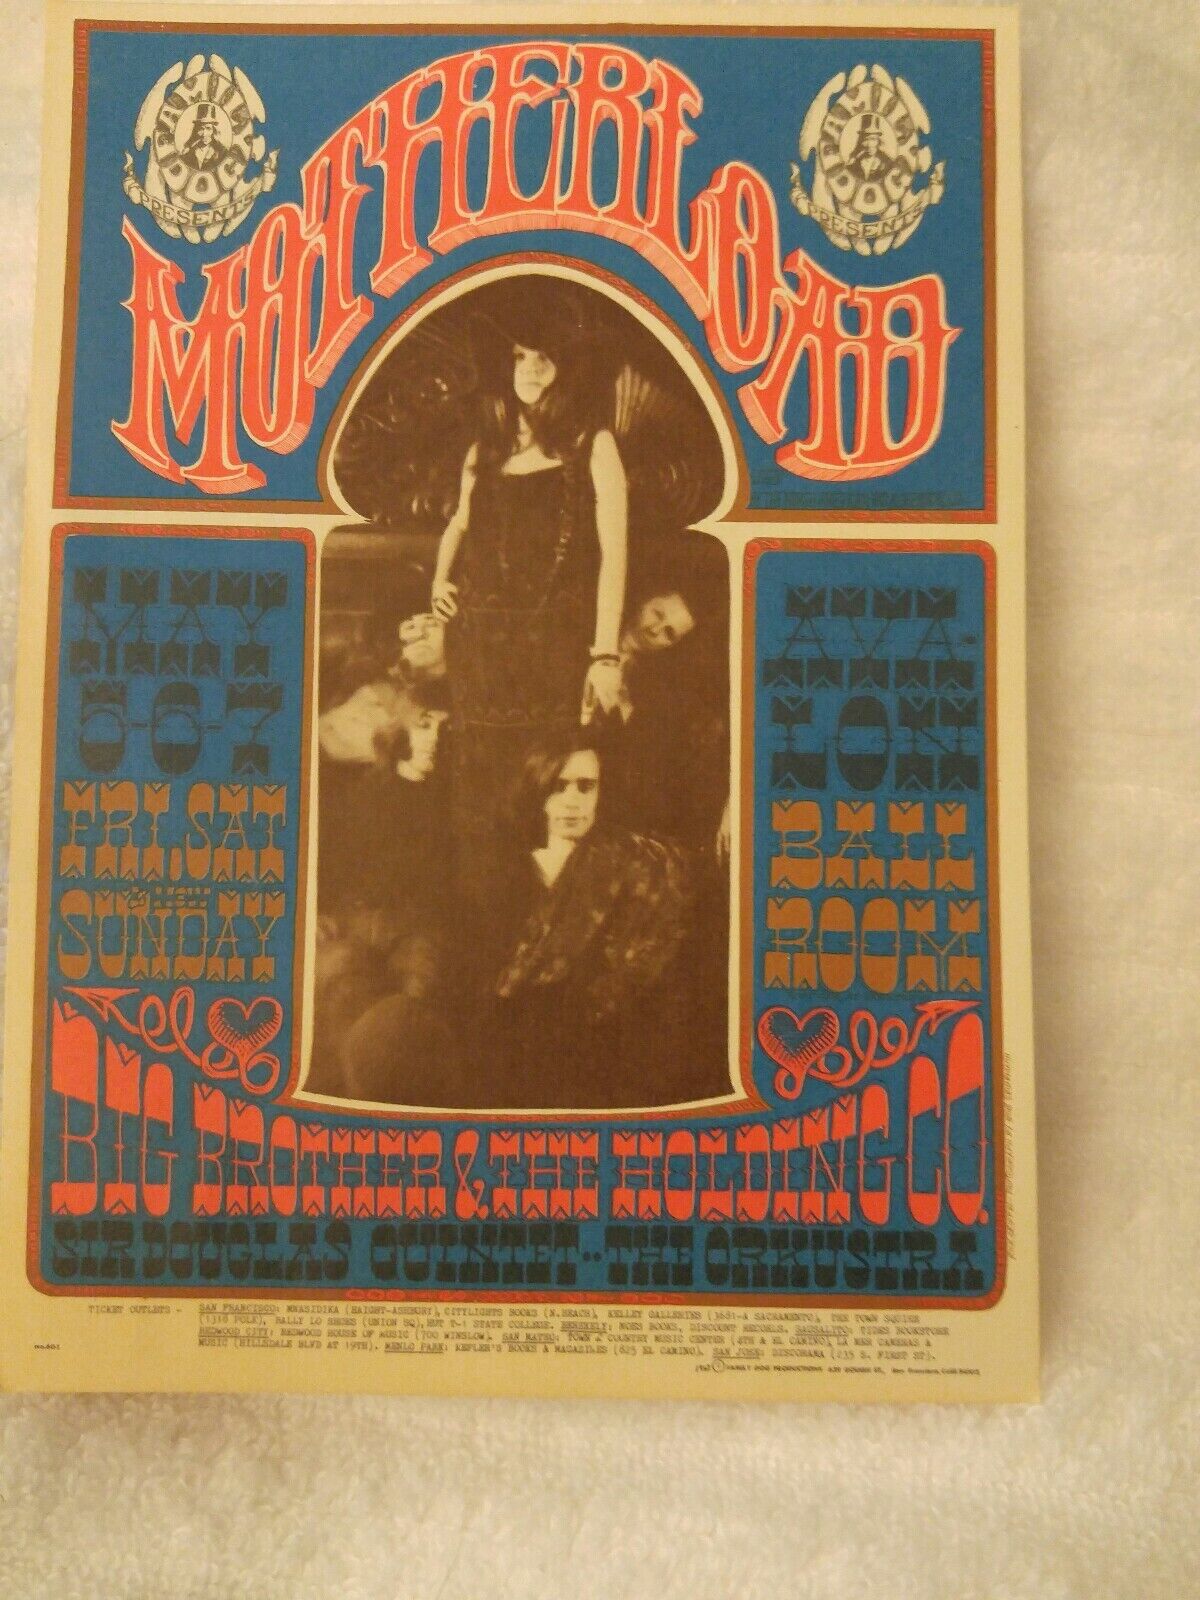 Big Brother and the Holding Company Postcard Mother load